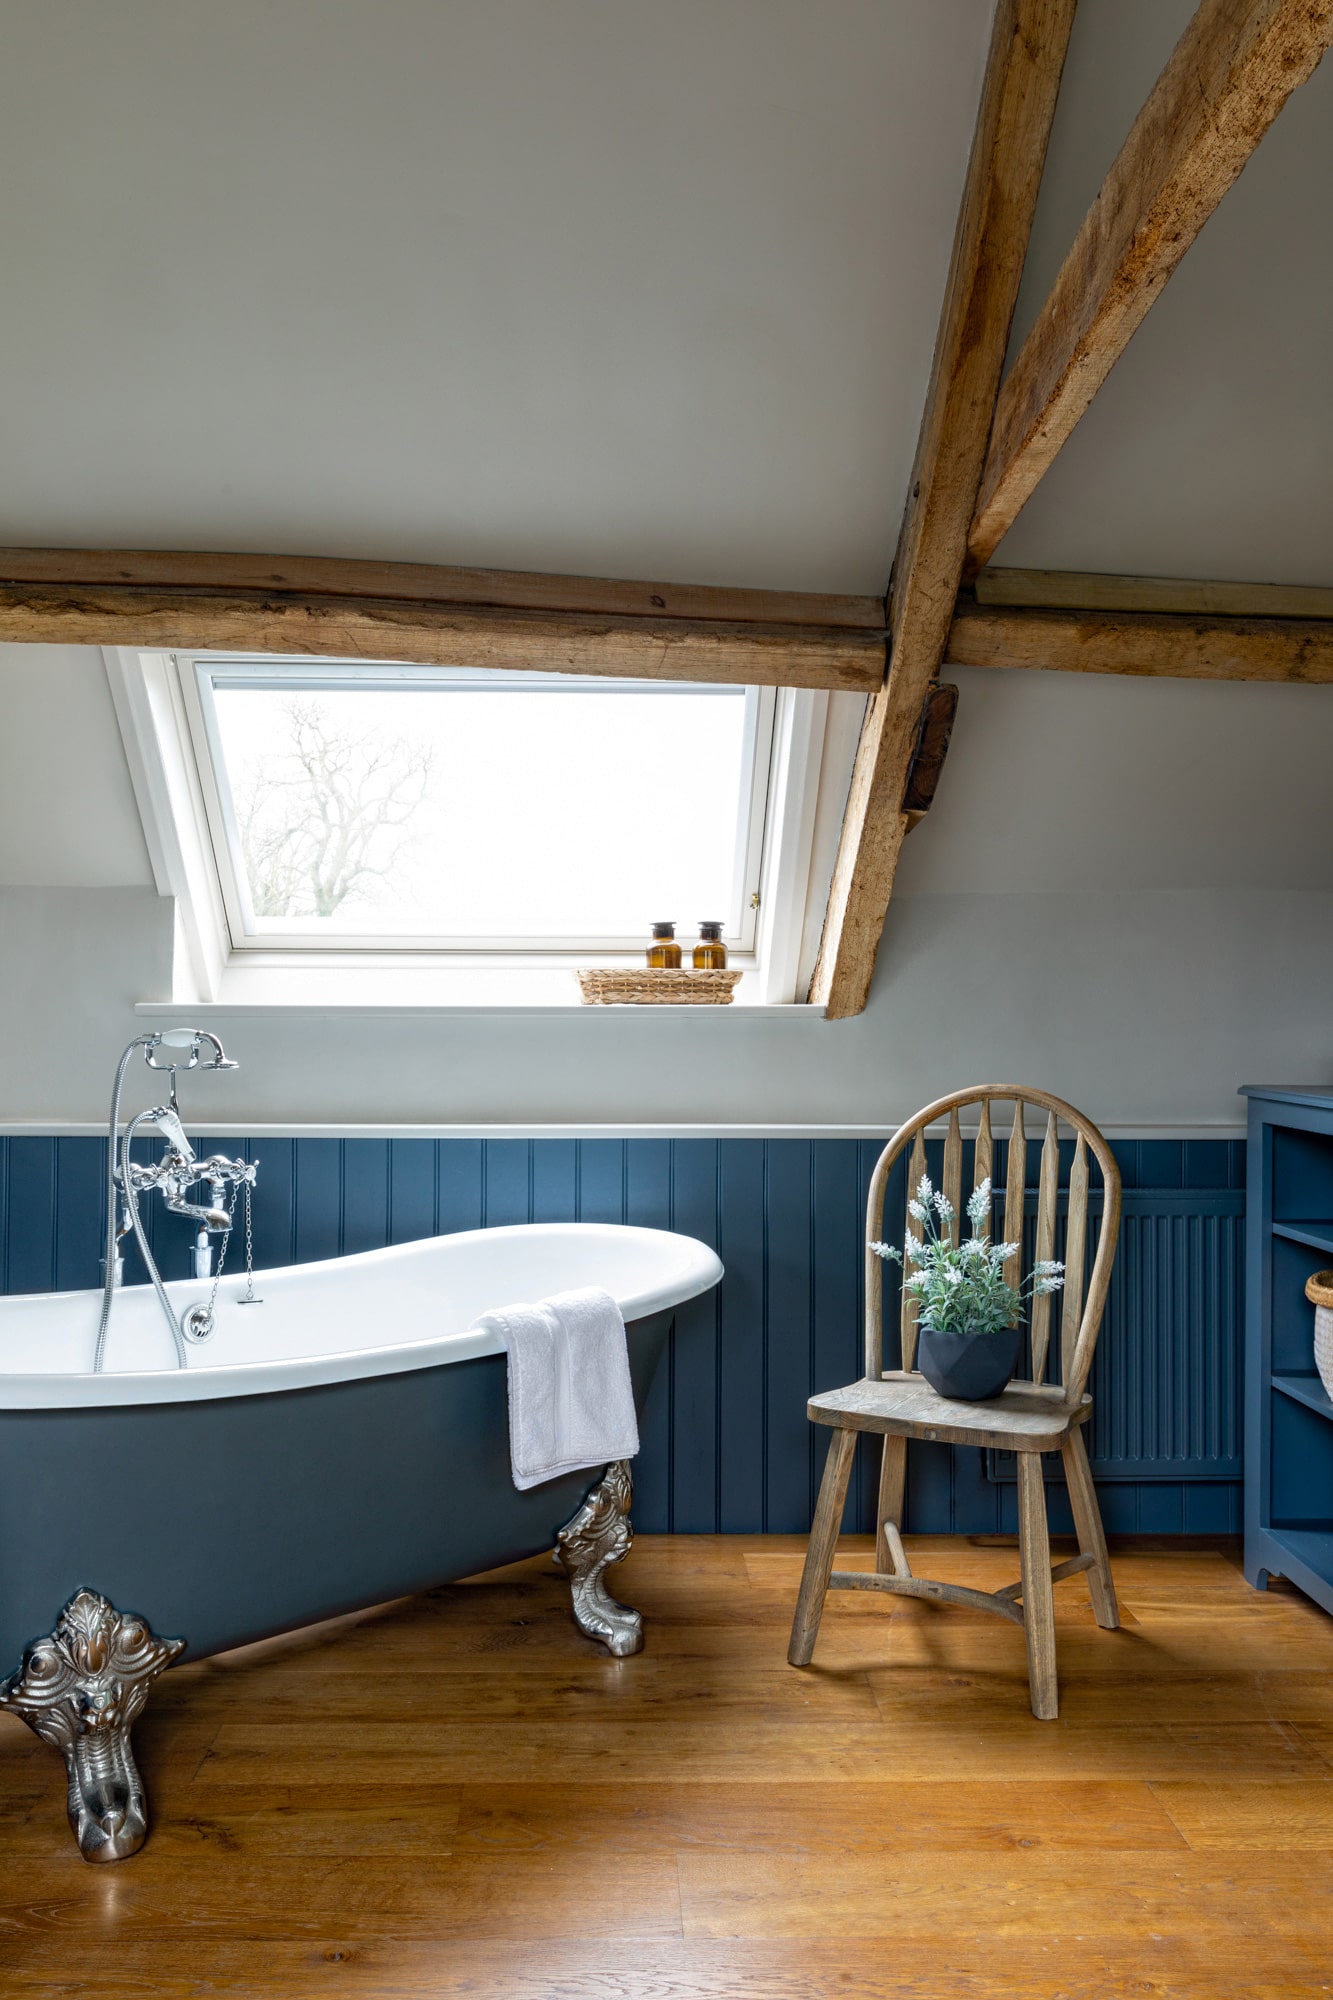 photo of a barn bathroom with freestanding bath; window; blue paneling; a chair with a plant pot on it